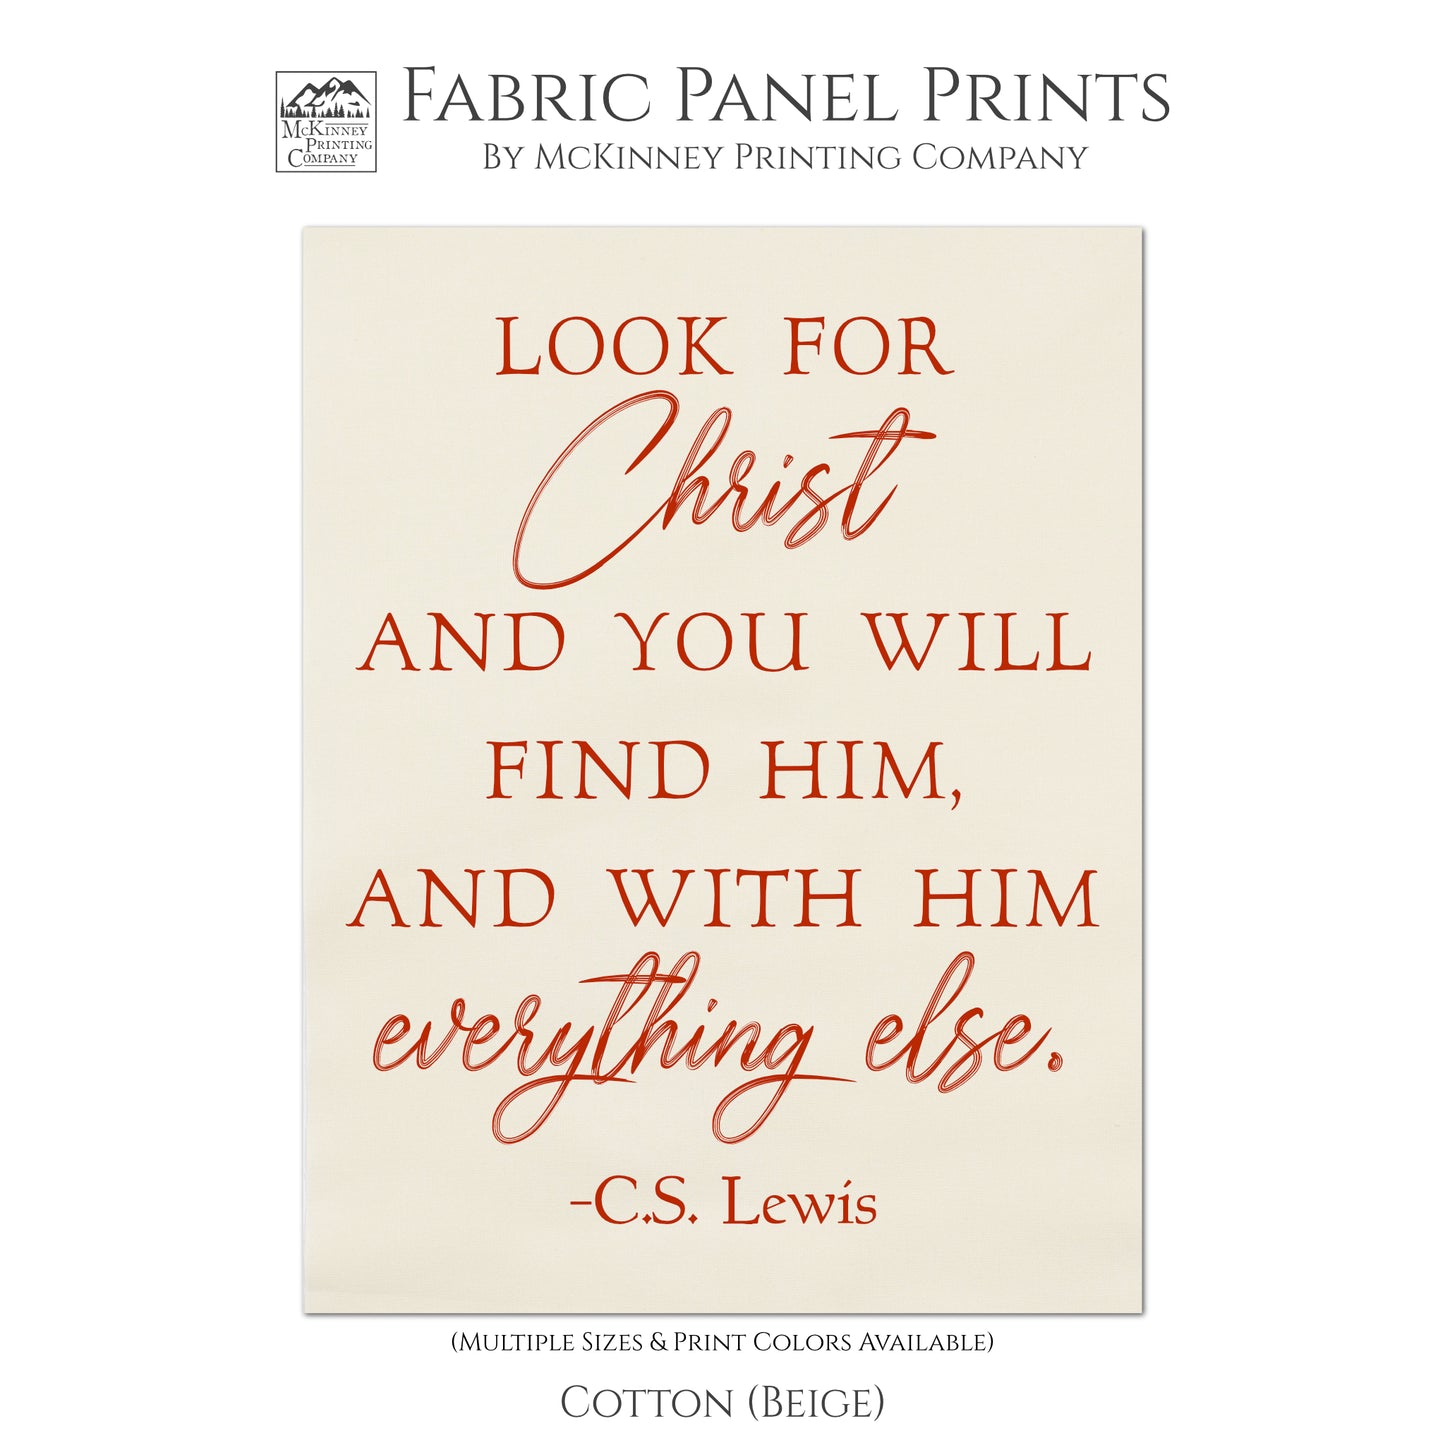 Look for Christ and you will find him, and with him everything else - CS Lewis Print, Fabric Panel, Wall Art, Quilt, Sewing - Cotton